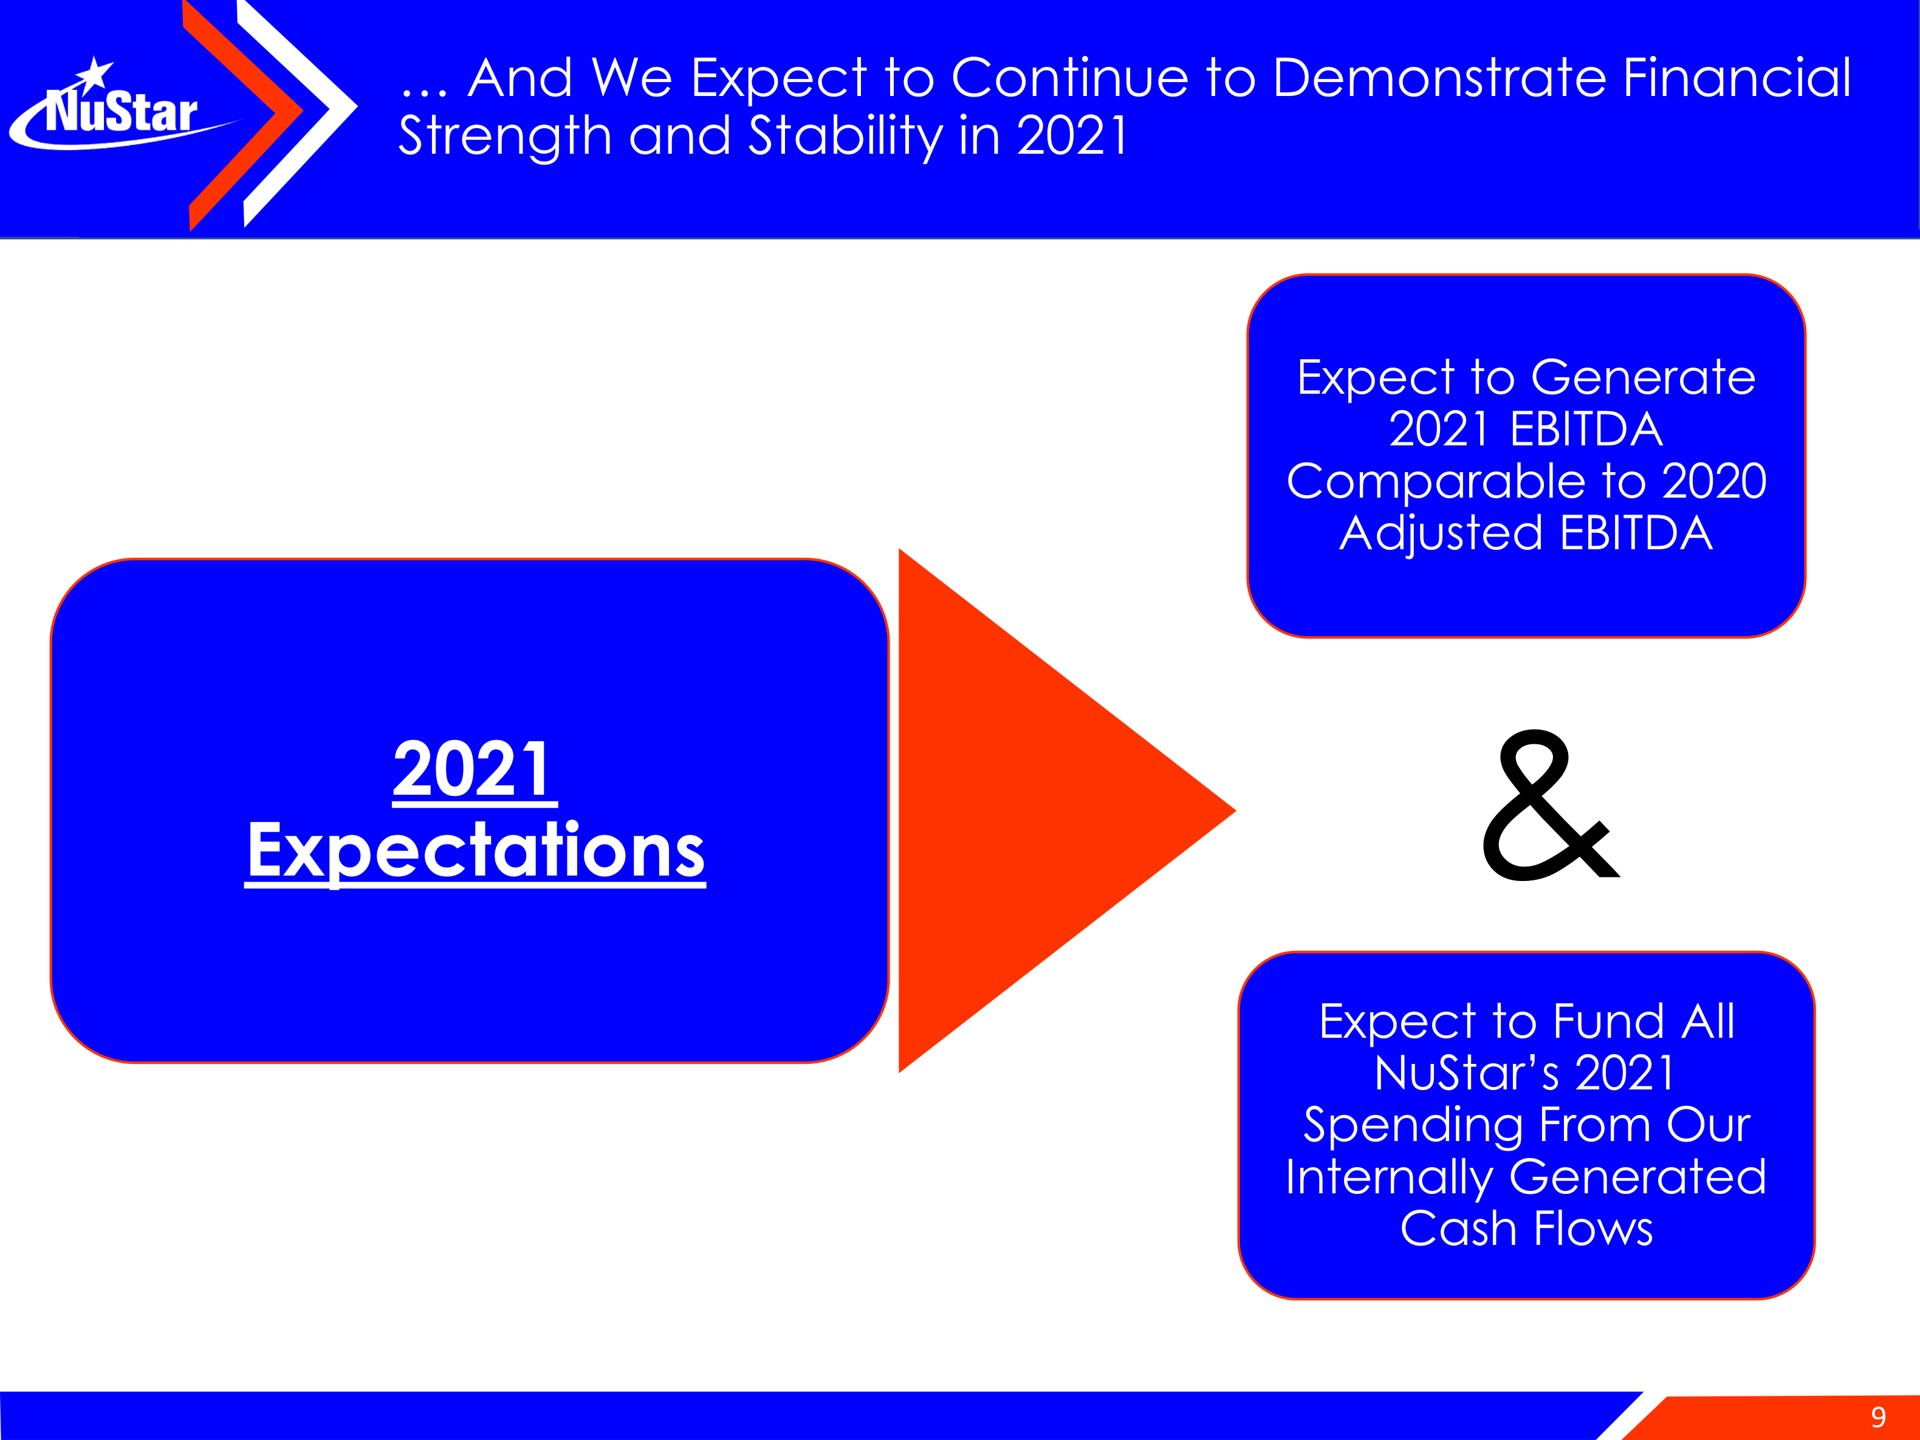 and we expect to continue to demonstrate financial strength and stability in expectations expect to generate comparable to adjusted expect to fund all spending from our internally generated cash flows | NuStar Energy